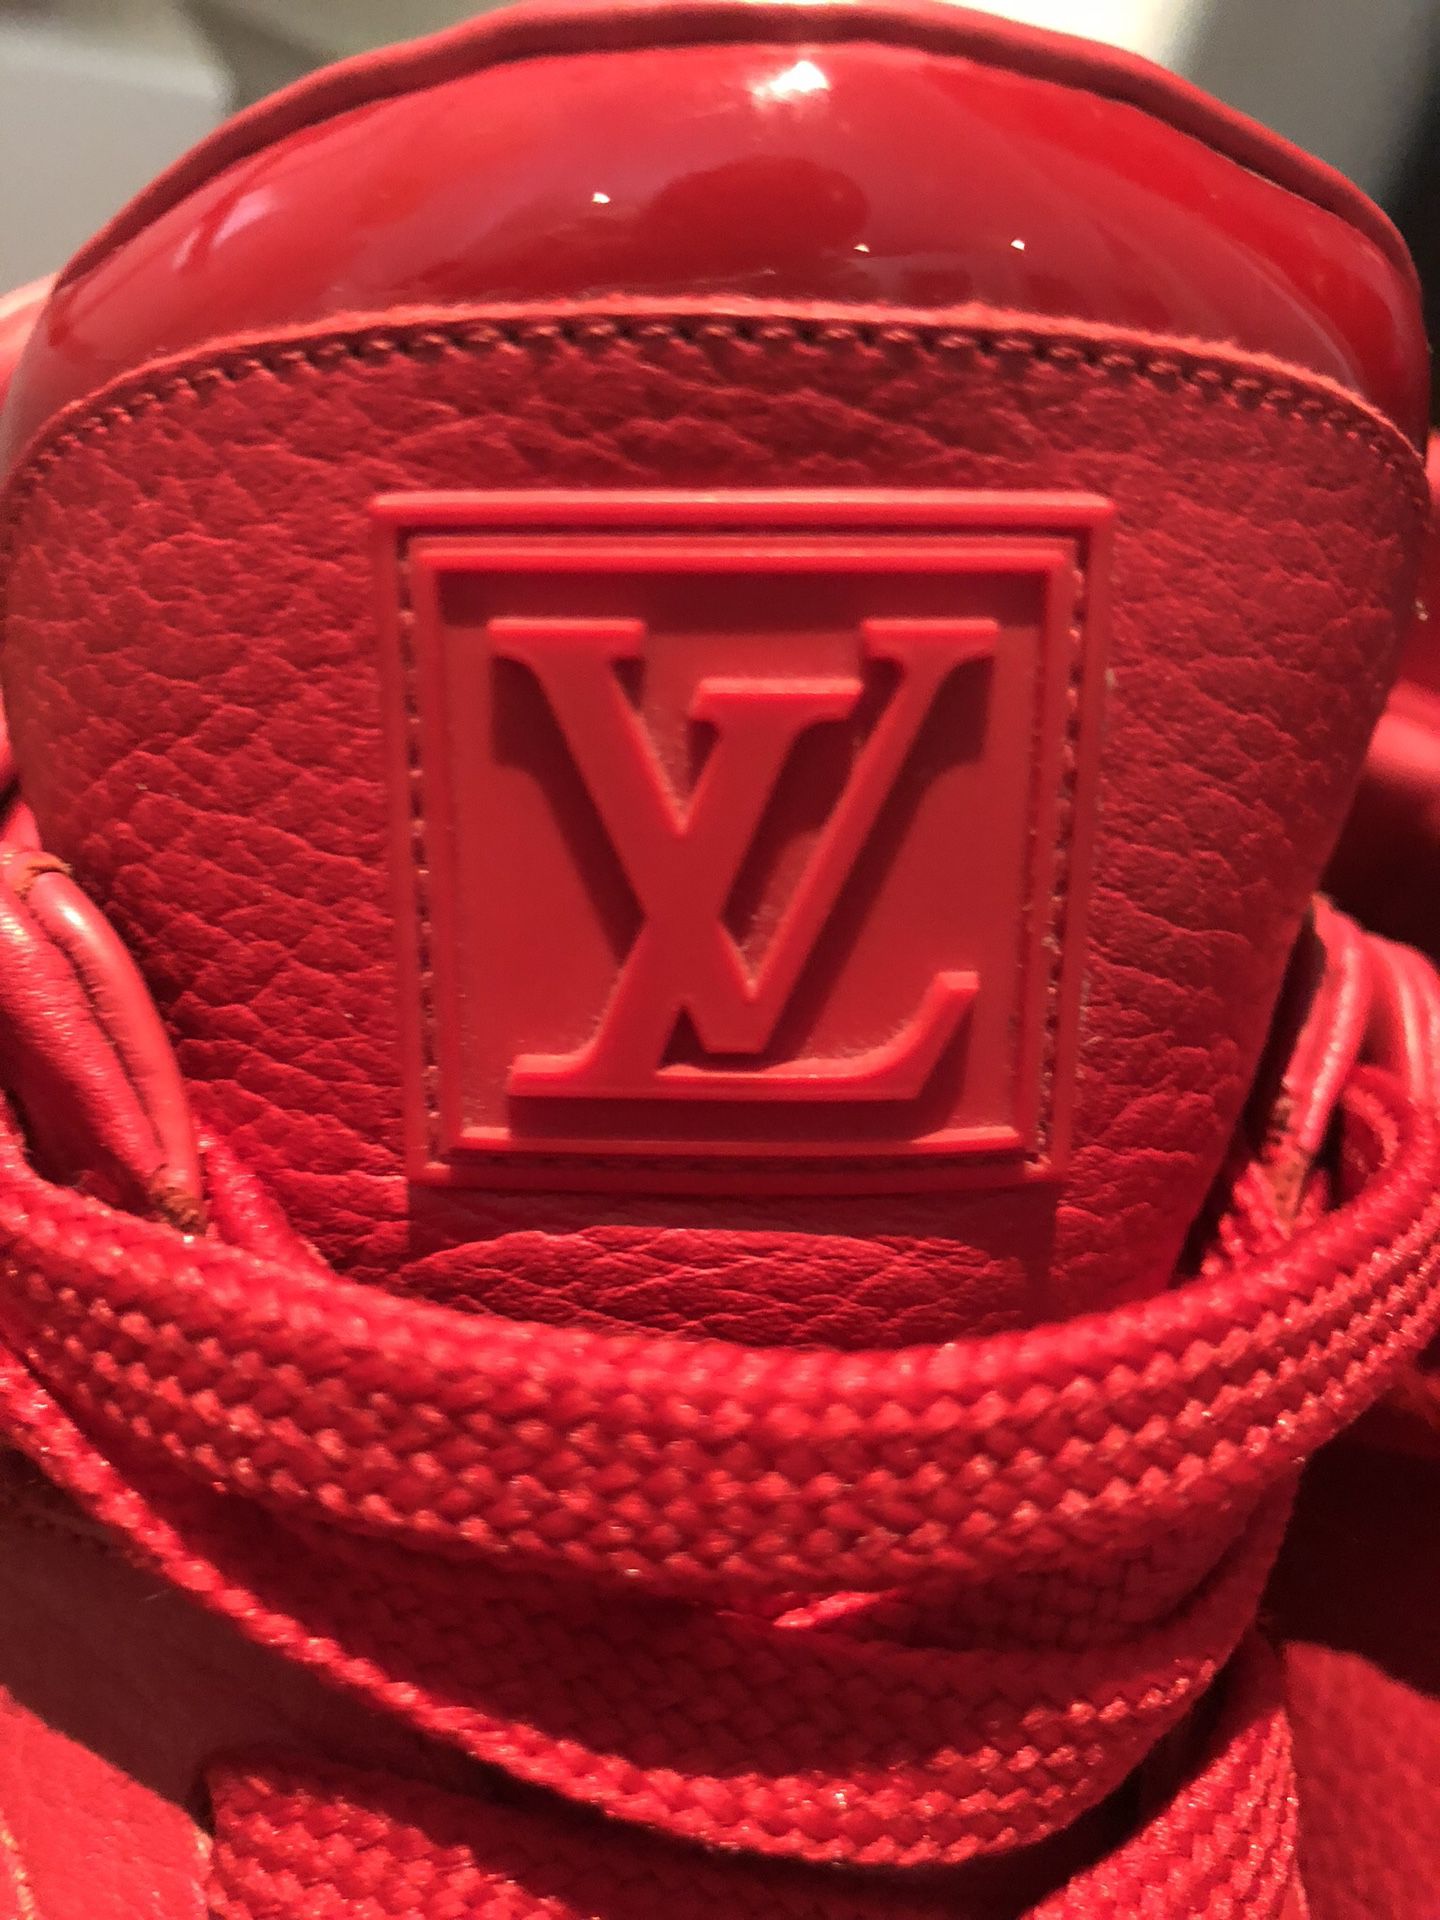 kanye west Jaspers, Louis Vuitton for Sale in Tampa, FL - OfferUp